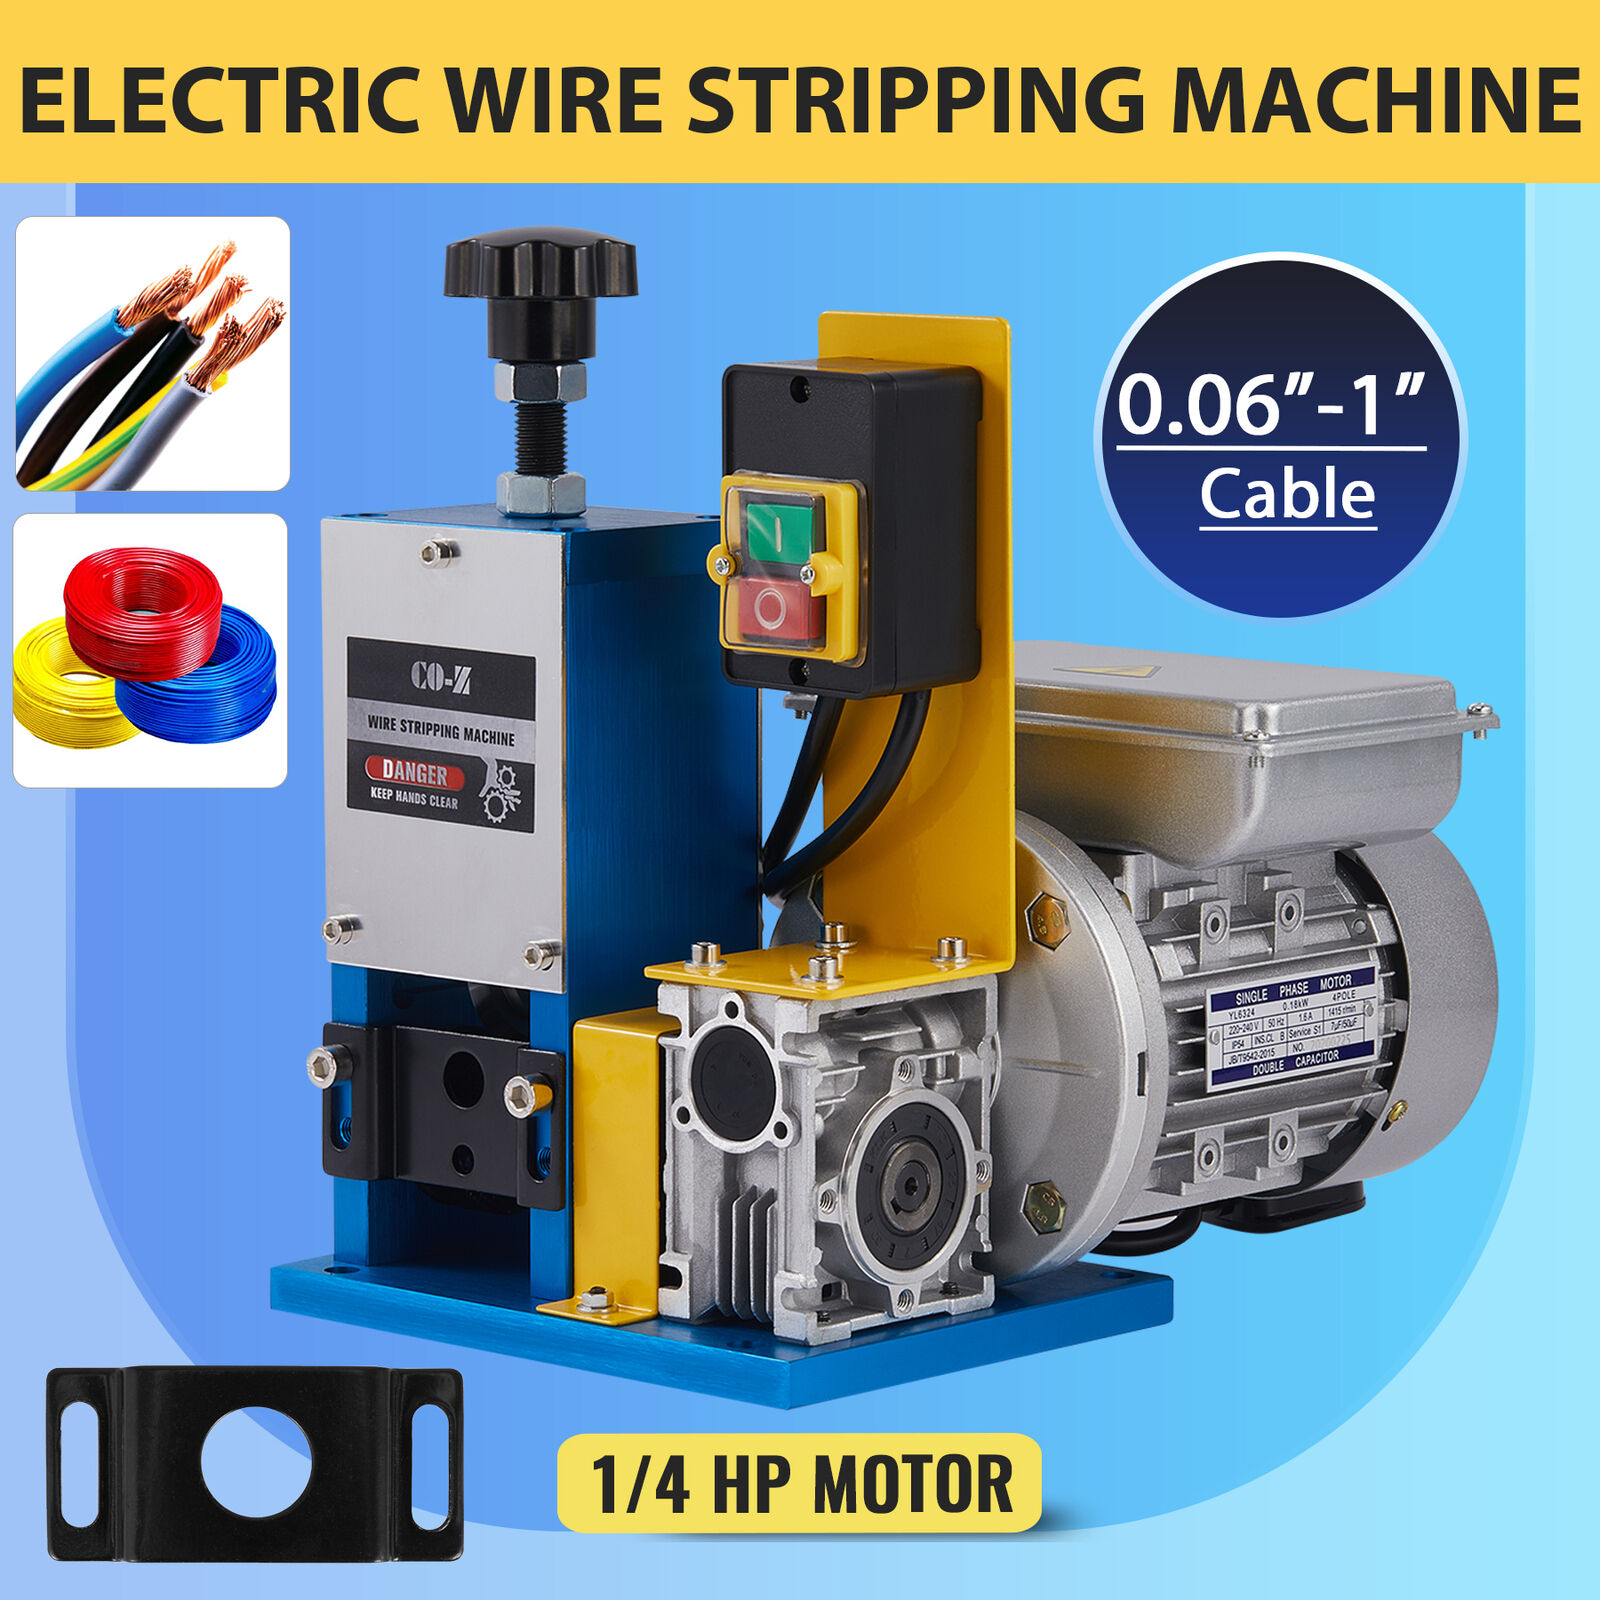 Portable Powered Electric Wire Stripping Machine Cable Stripper Metal Tool Scrap